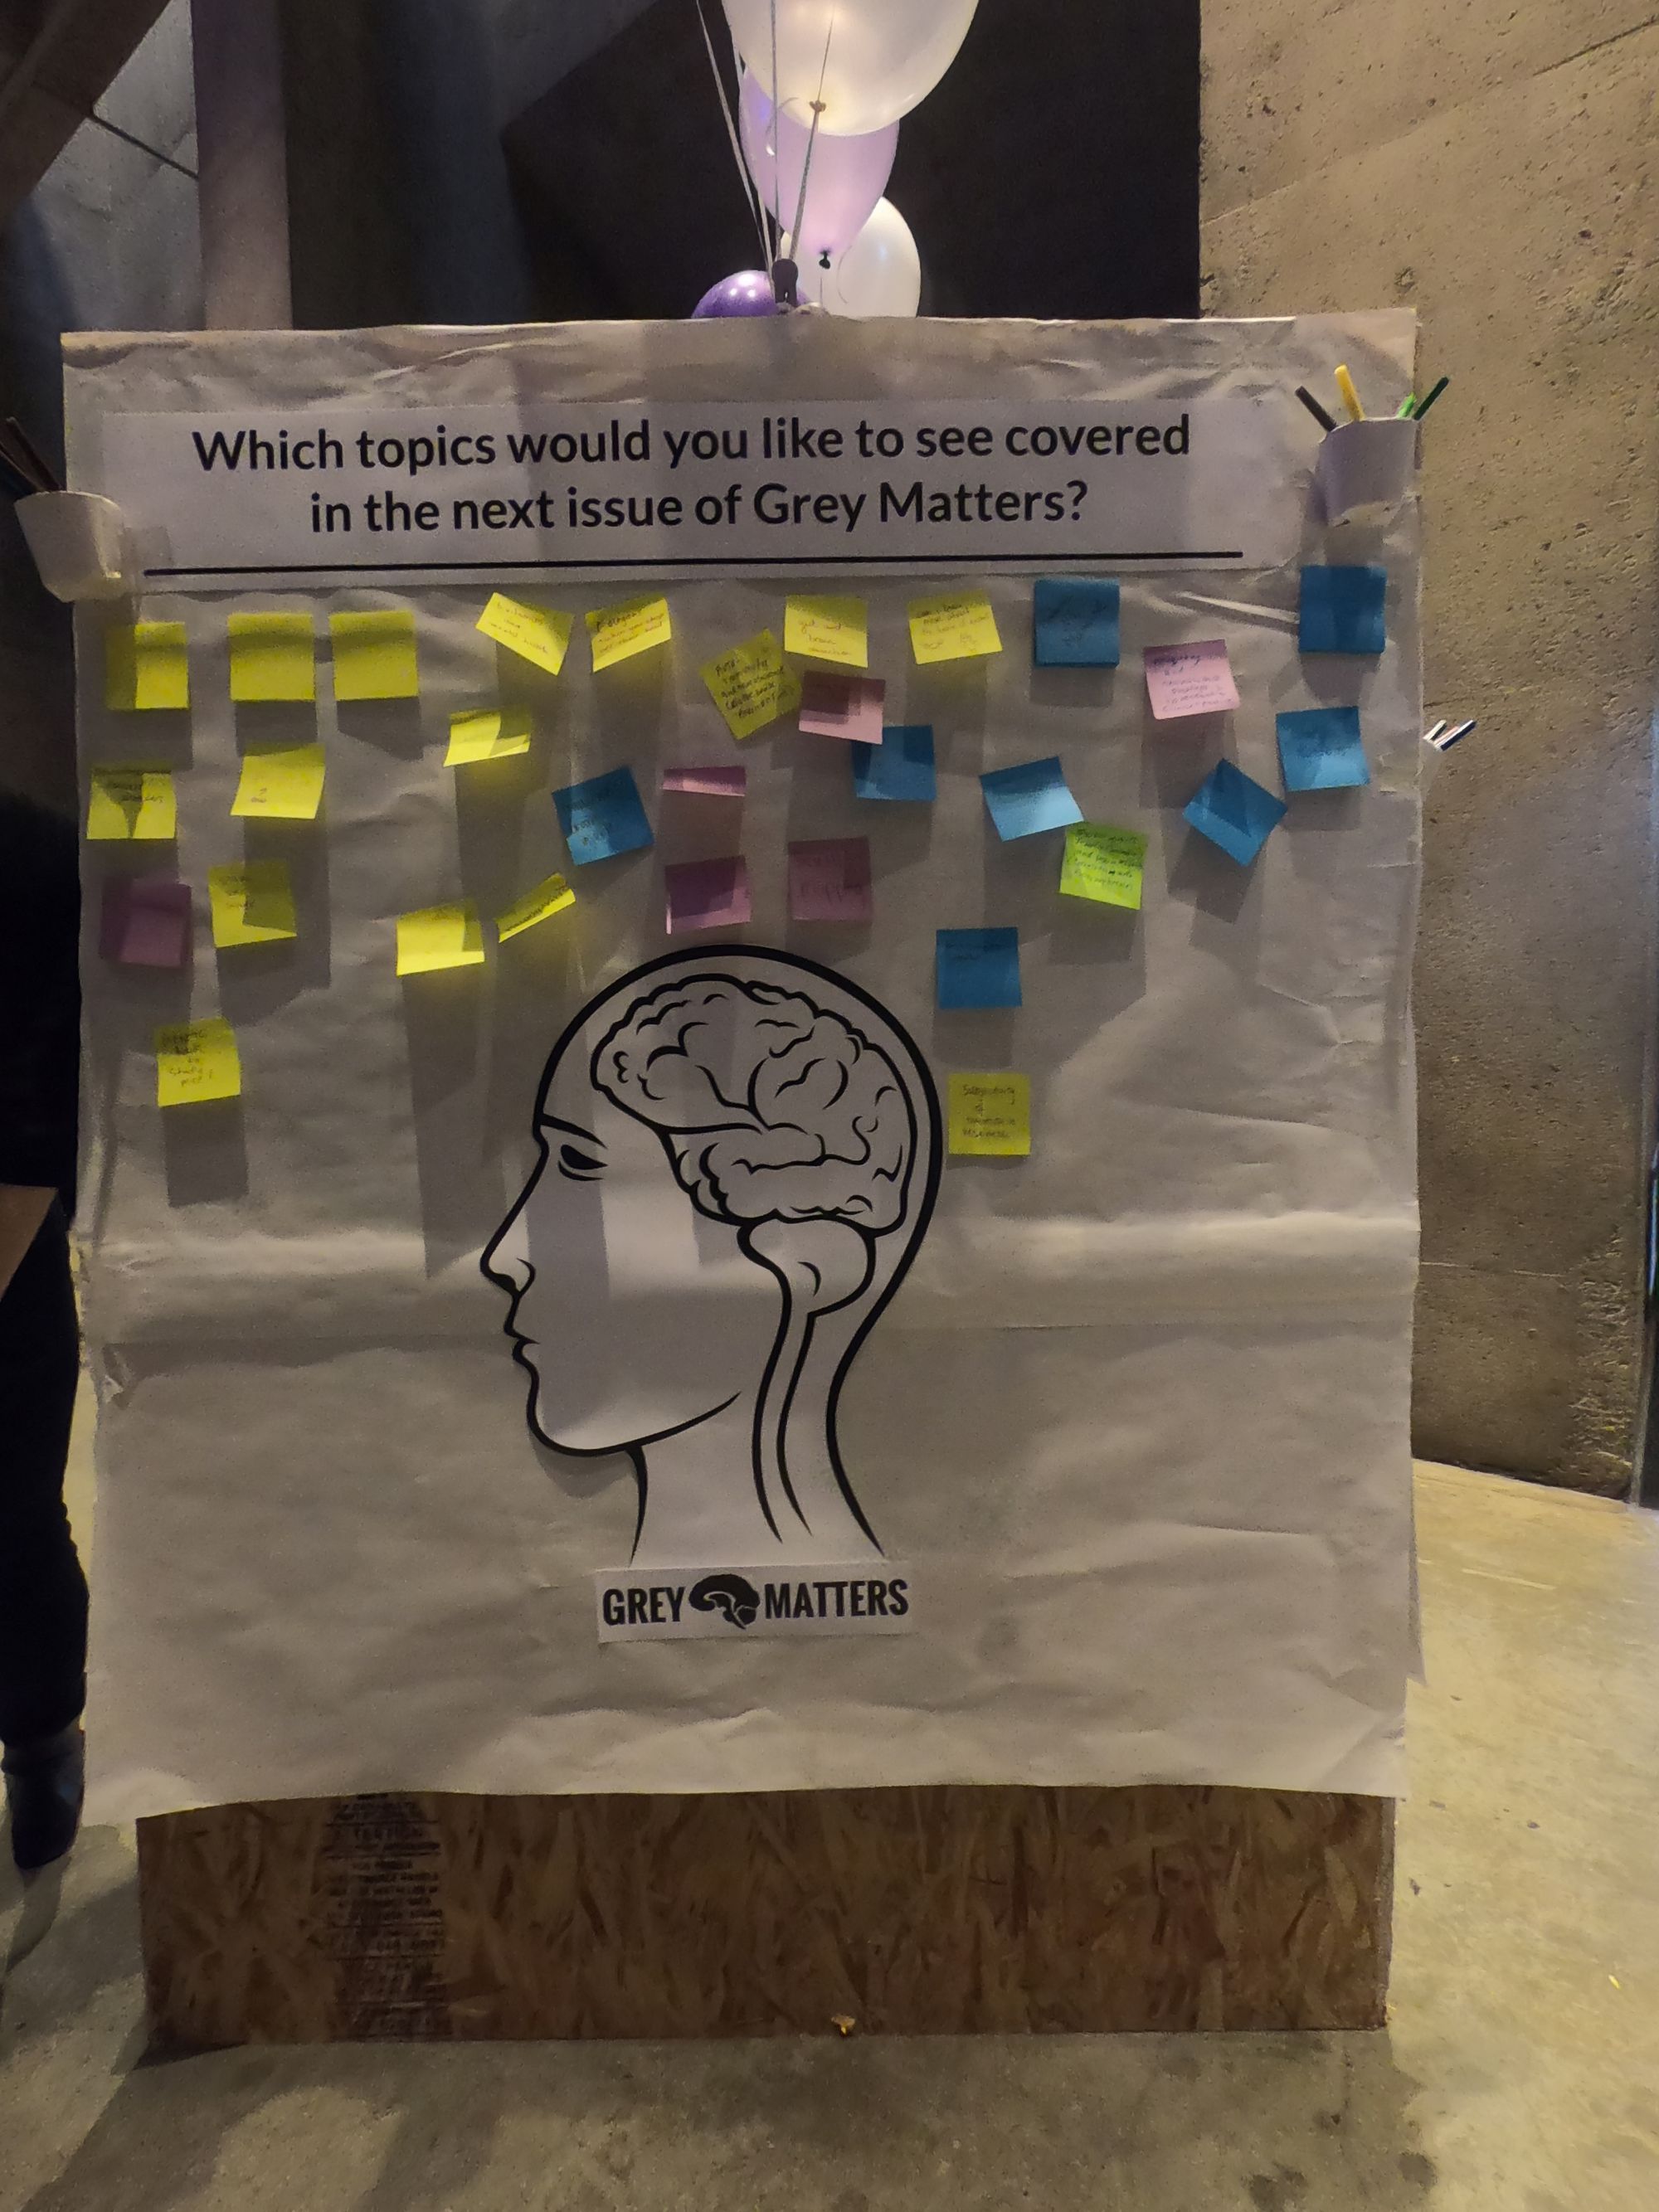 A board with the question: 'What topics would you like to see covered in the next issue of Grey Matters?' with multicolored sticky notes that attendees put on it with their desired topics.